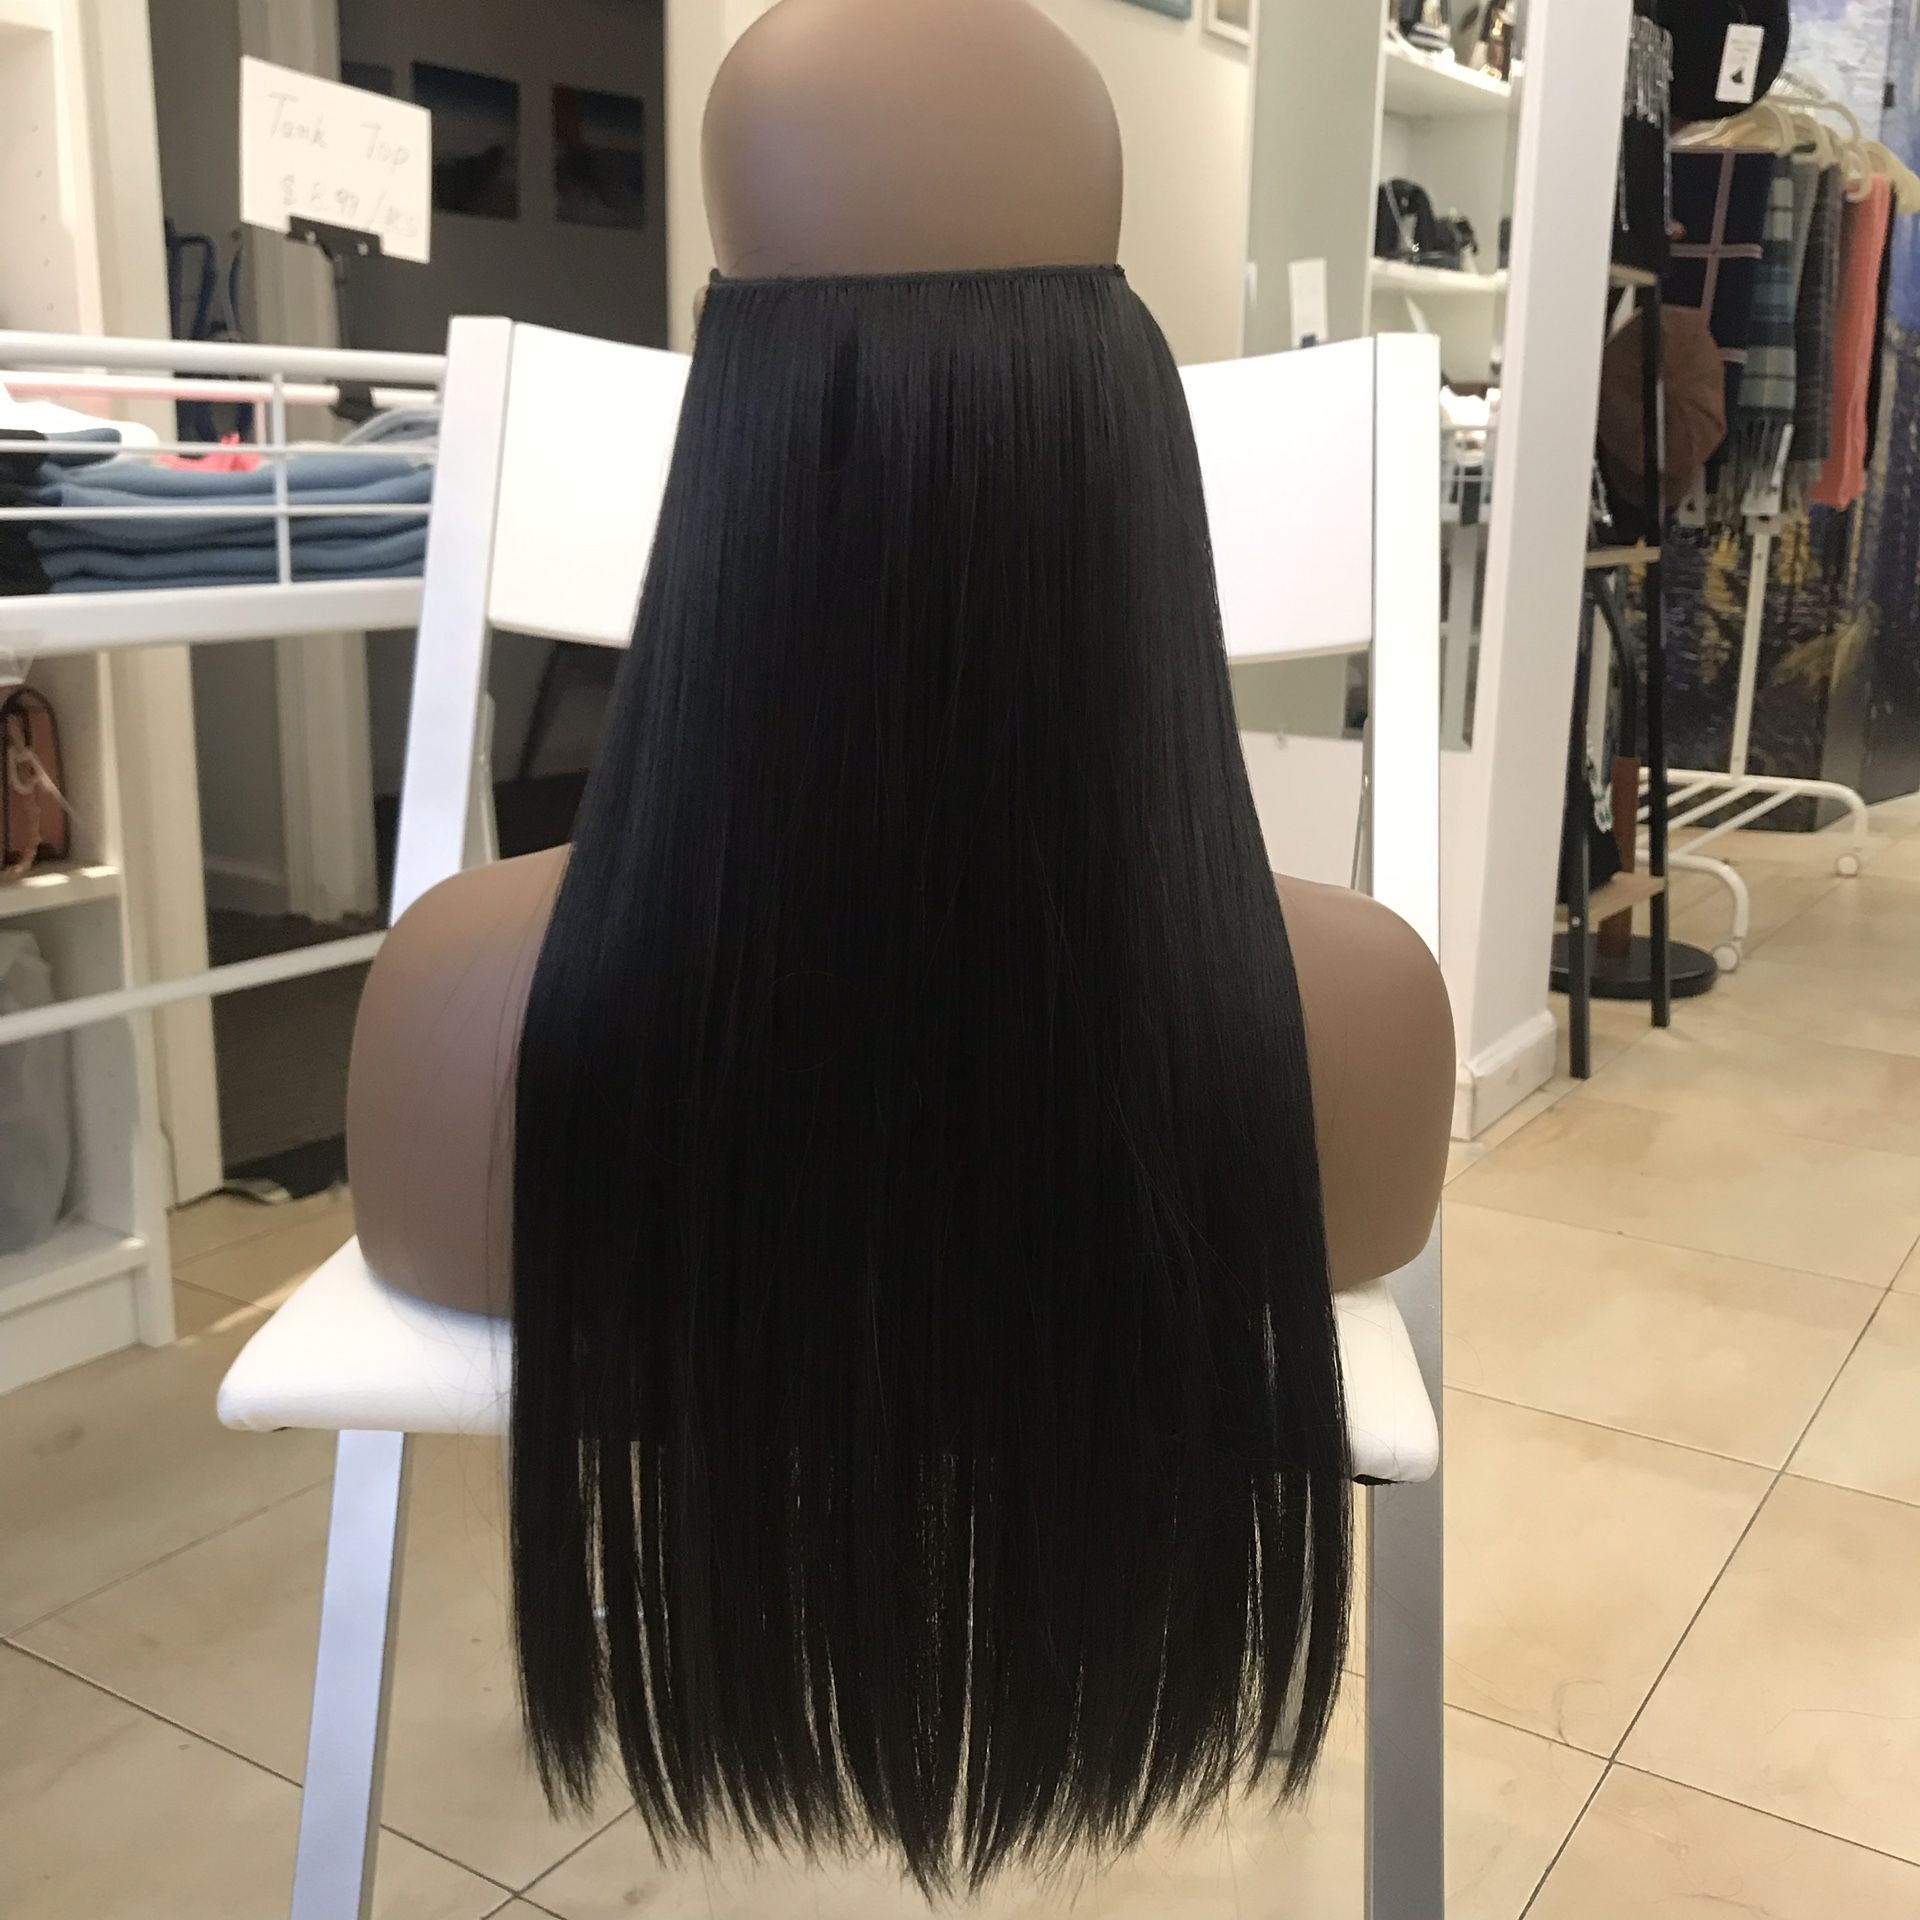 26” Fish line band halo hair extensions